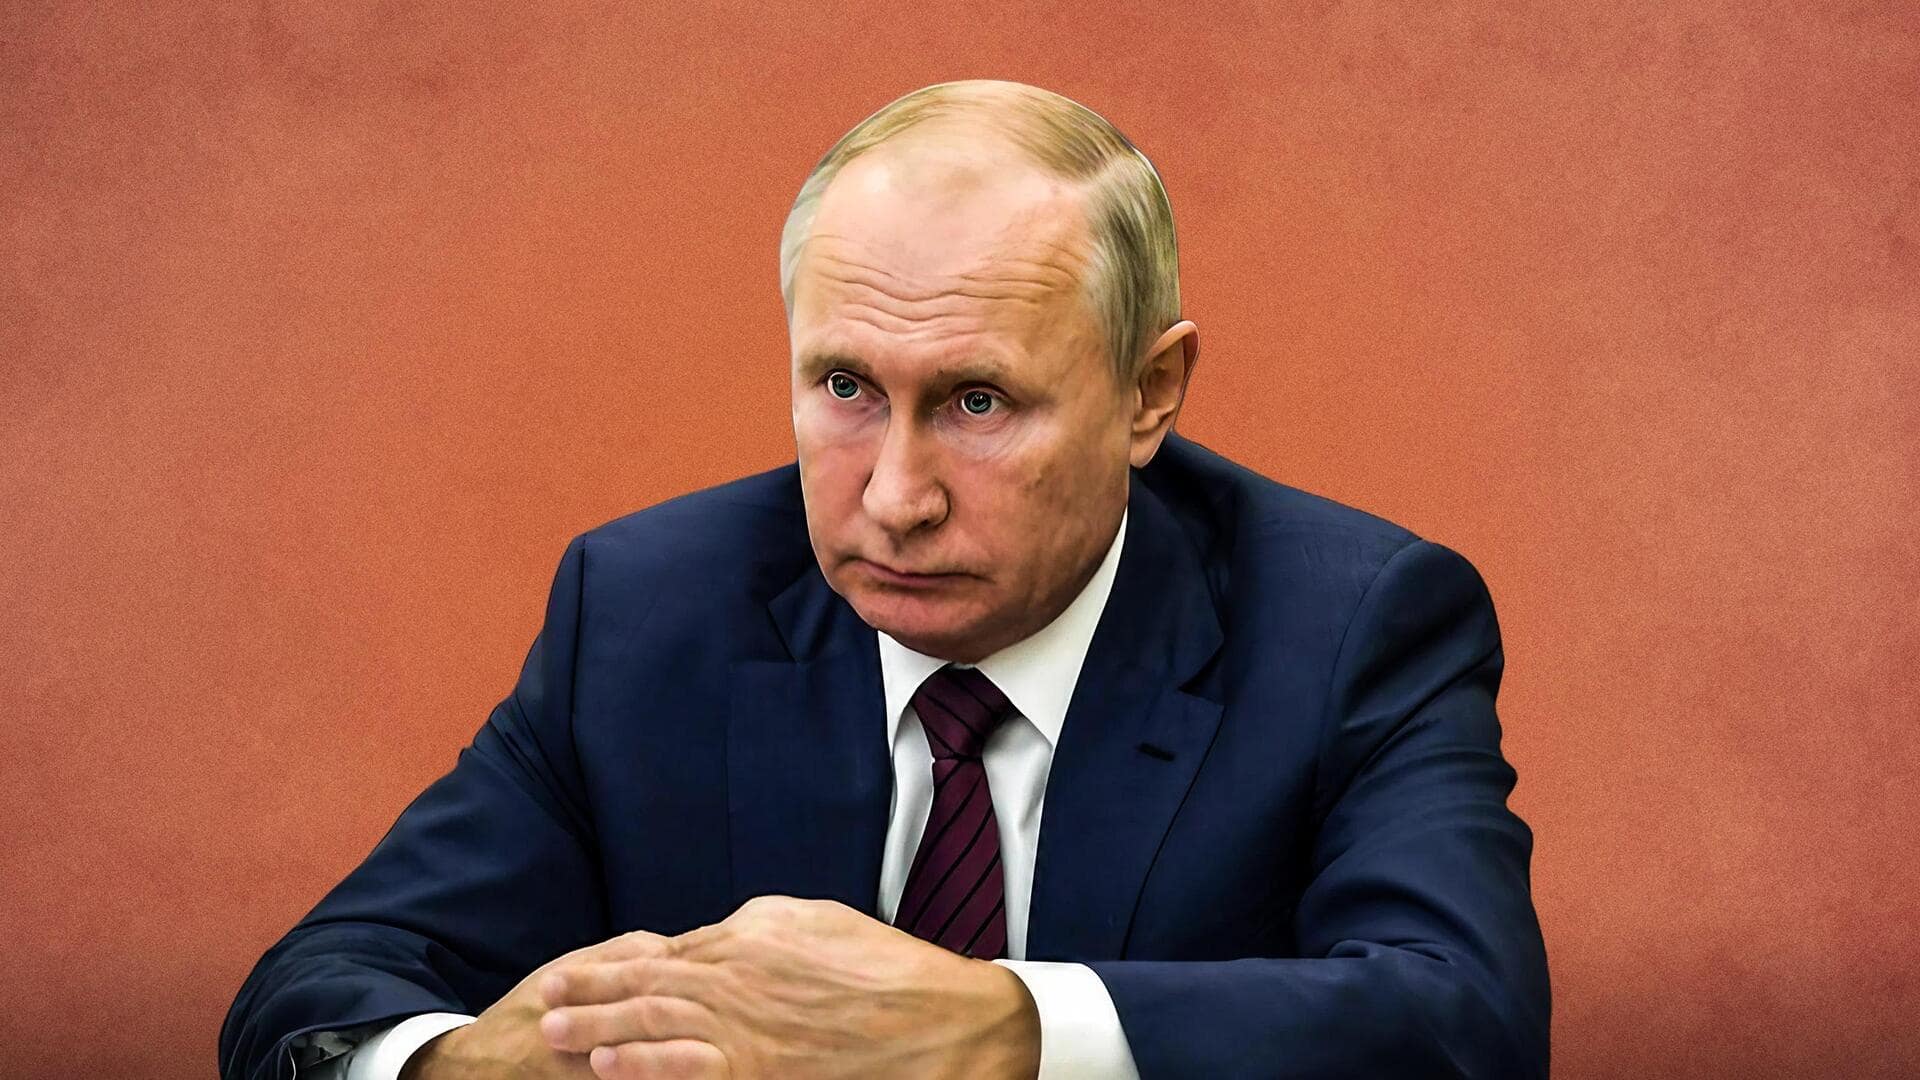 Russia strongly denies Vladimir Putin's death claims